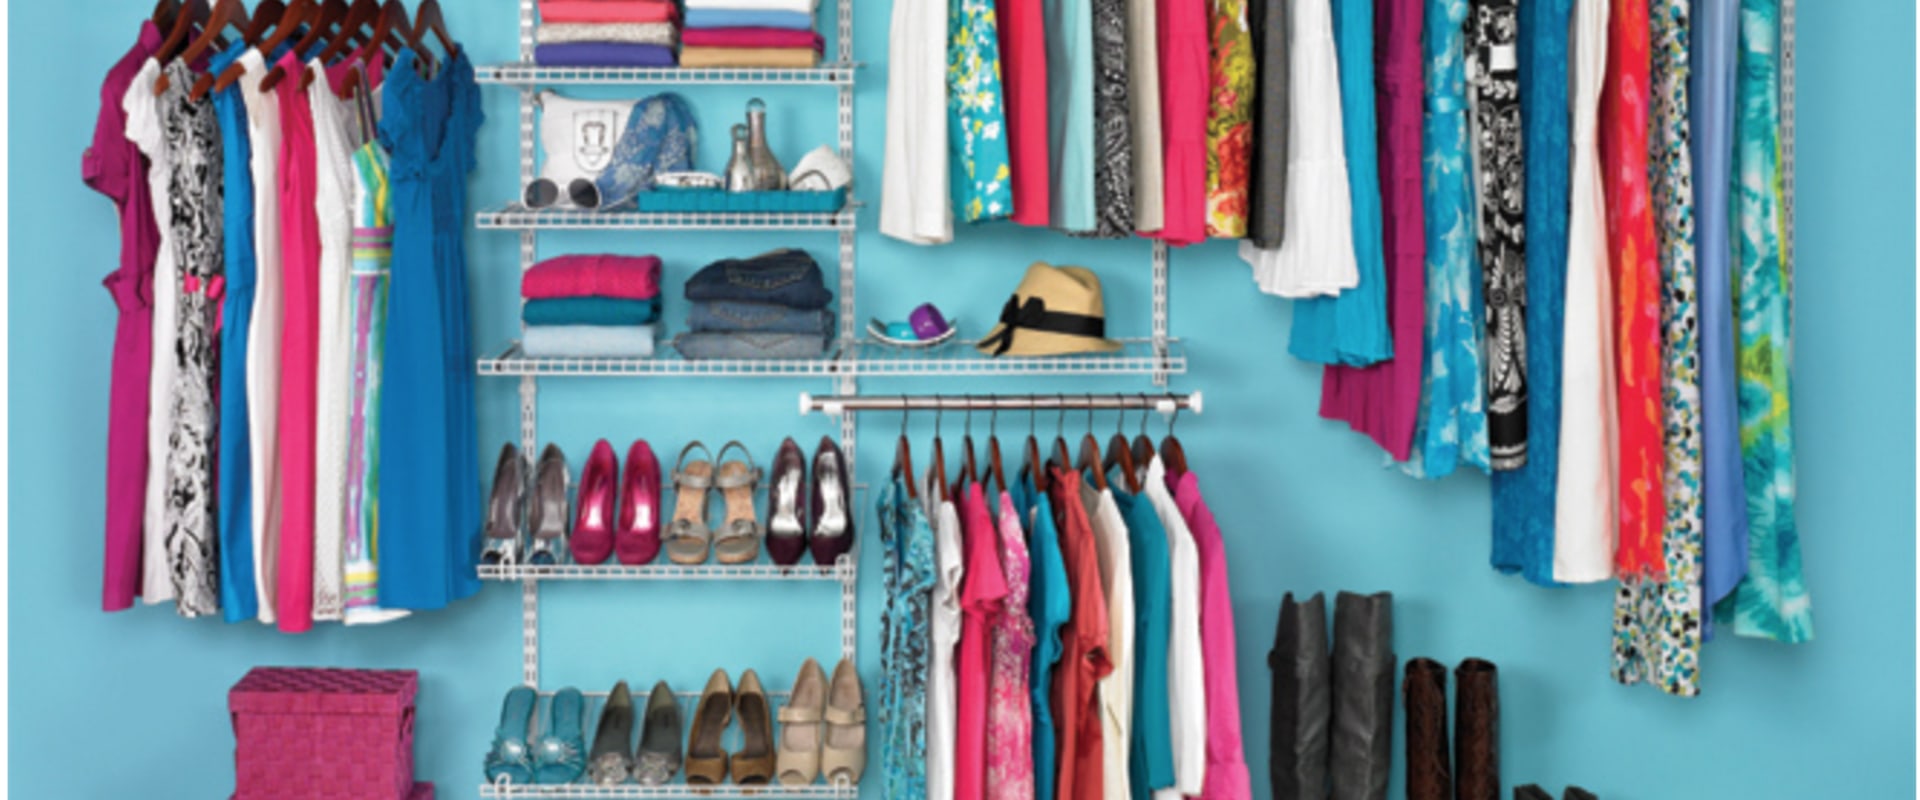 How to Declutter and Organize Using the Marie Kondo Method